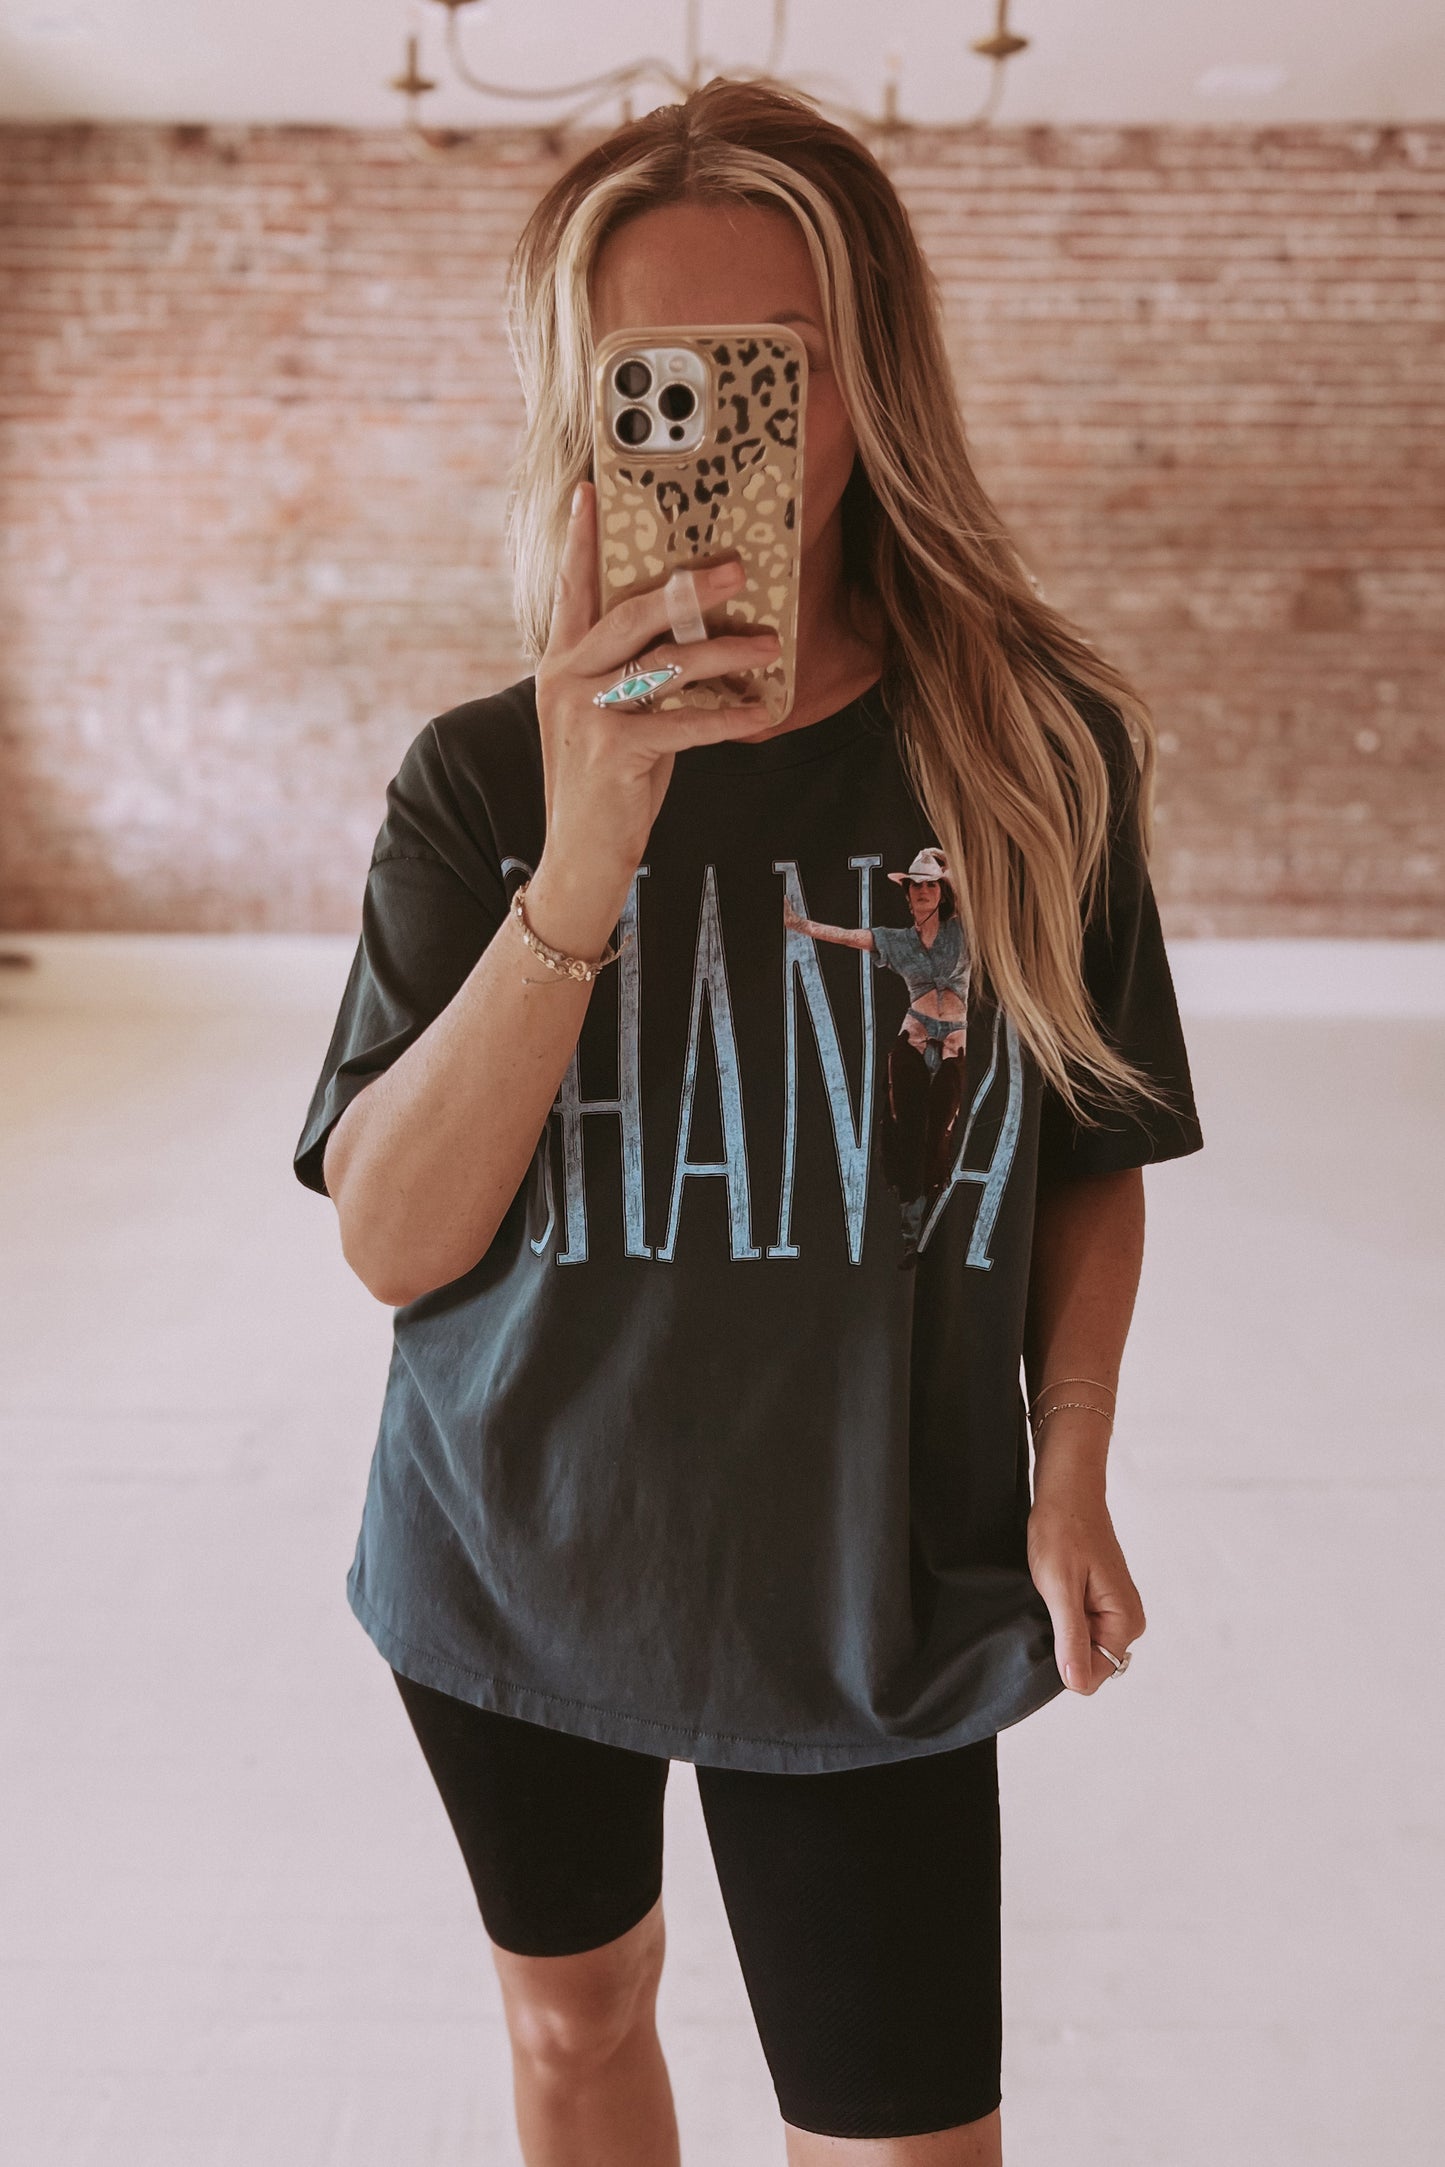 Shania "Boots" Licensed Tee